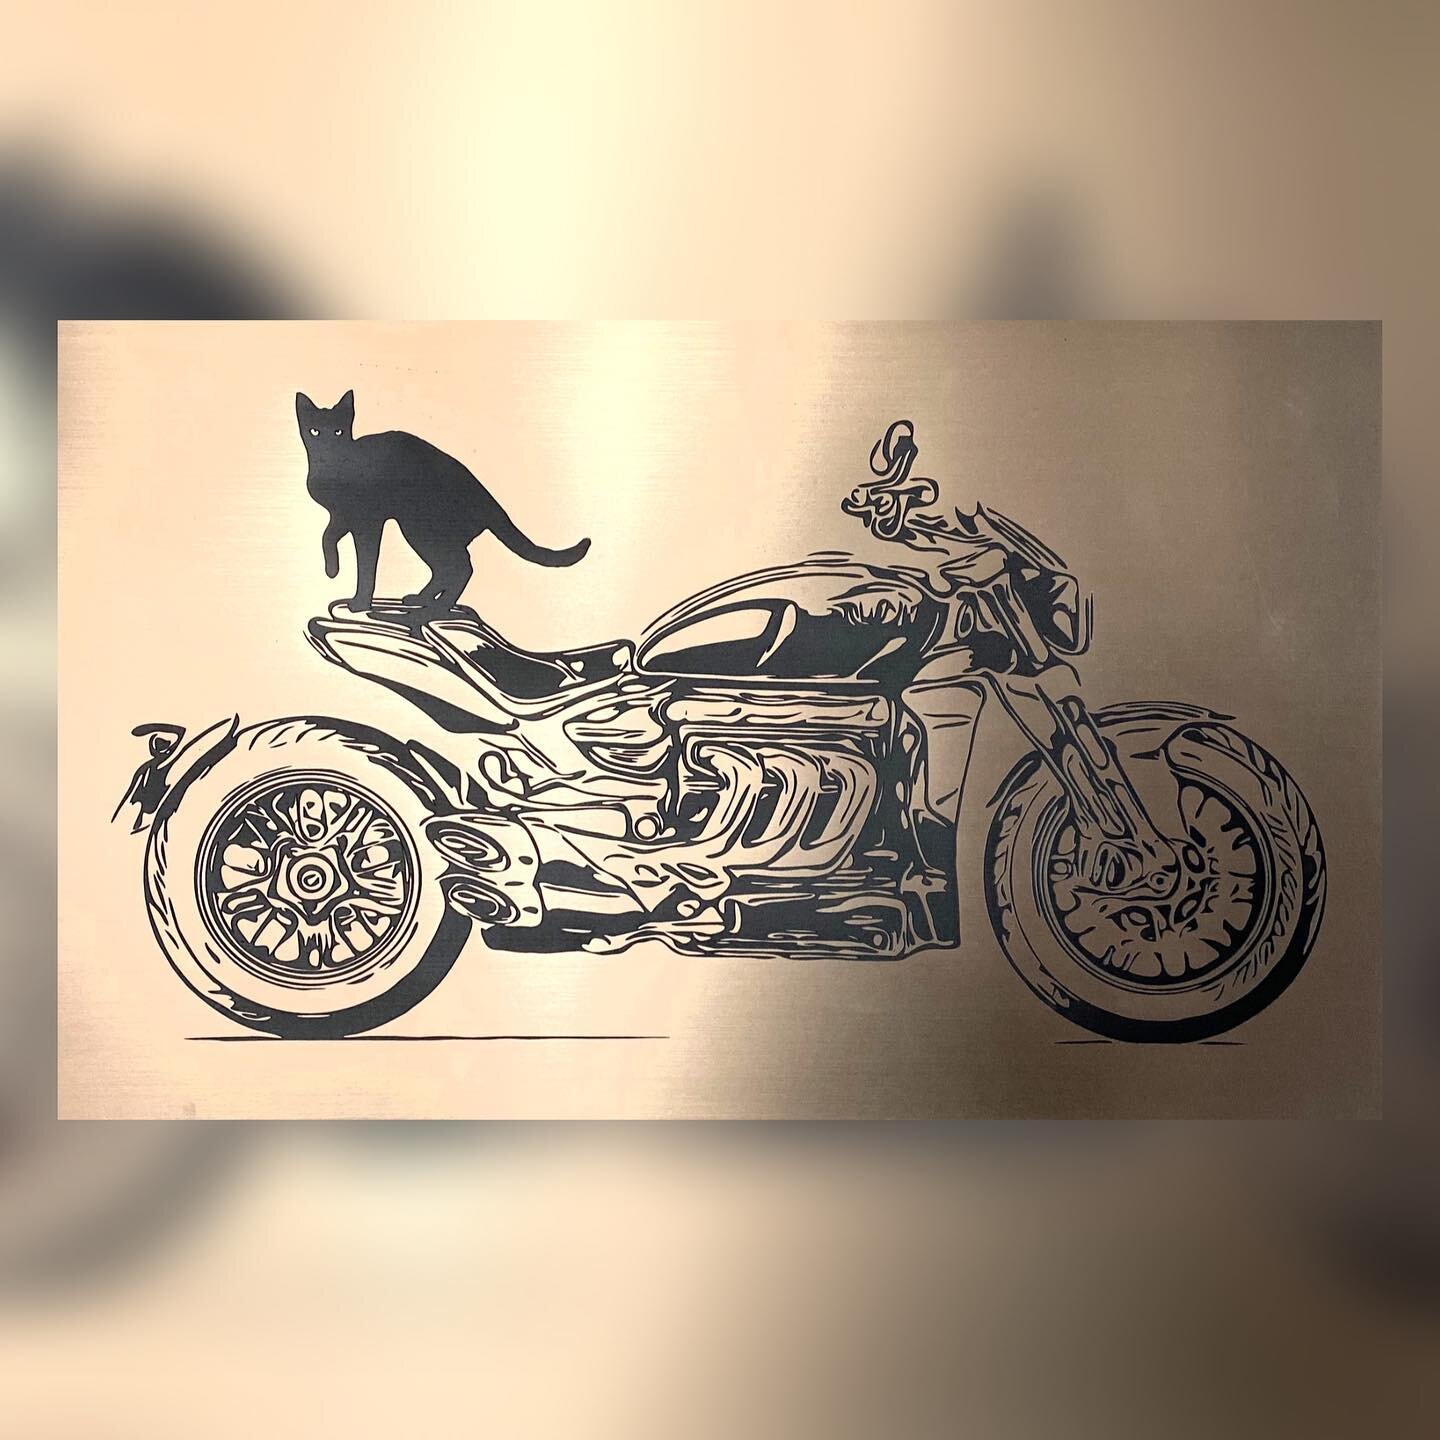 Looking for a unique way to celebrate your passion?
This client requested a simple plaque with a Triumph Rocket 3, and wanted to include his cat Rocket as well!
Our in-house designers whipped this up in a flash, and the client was stunned with the ou